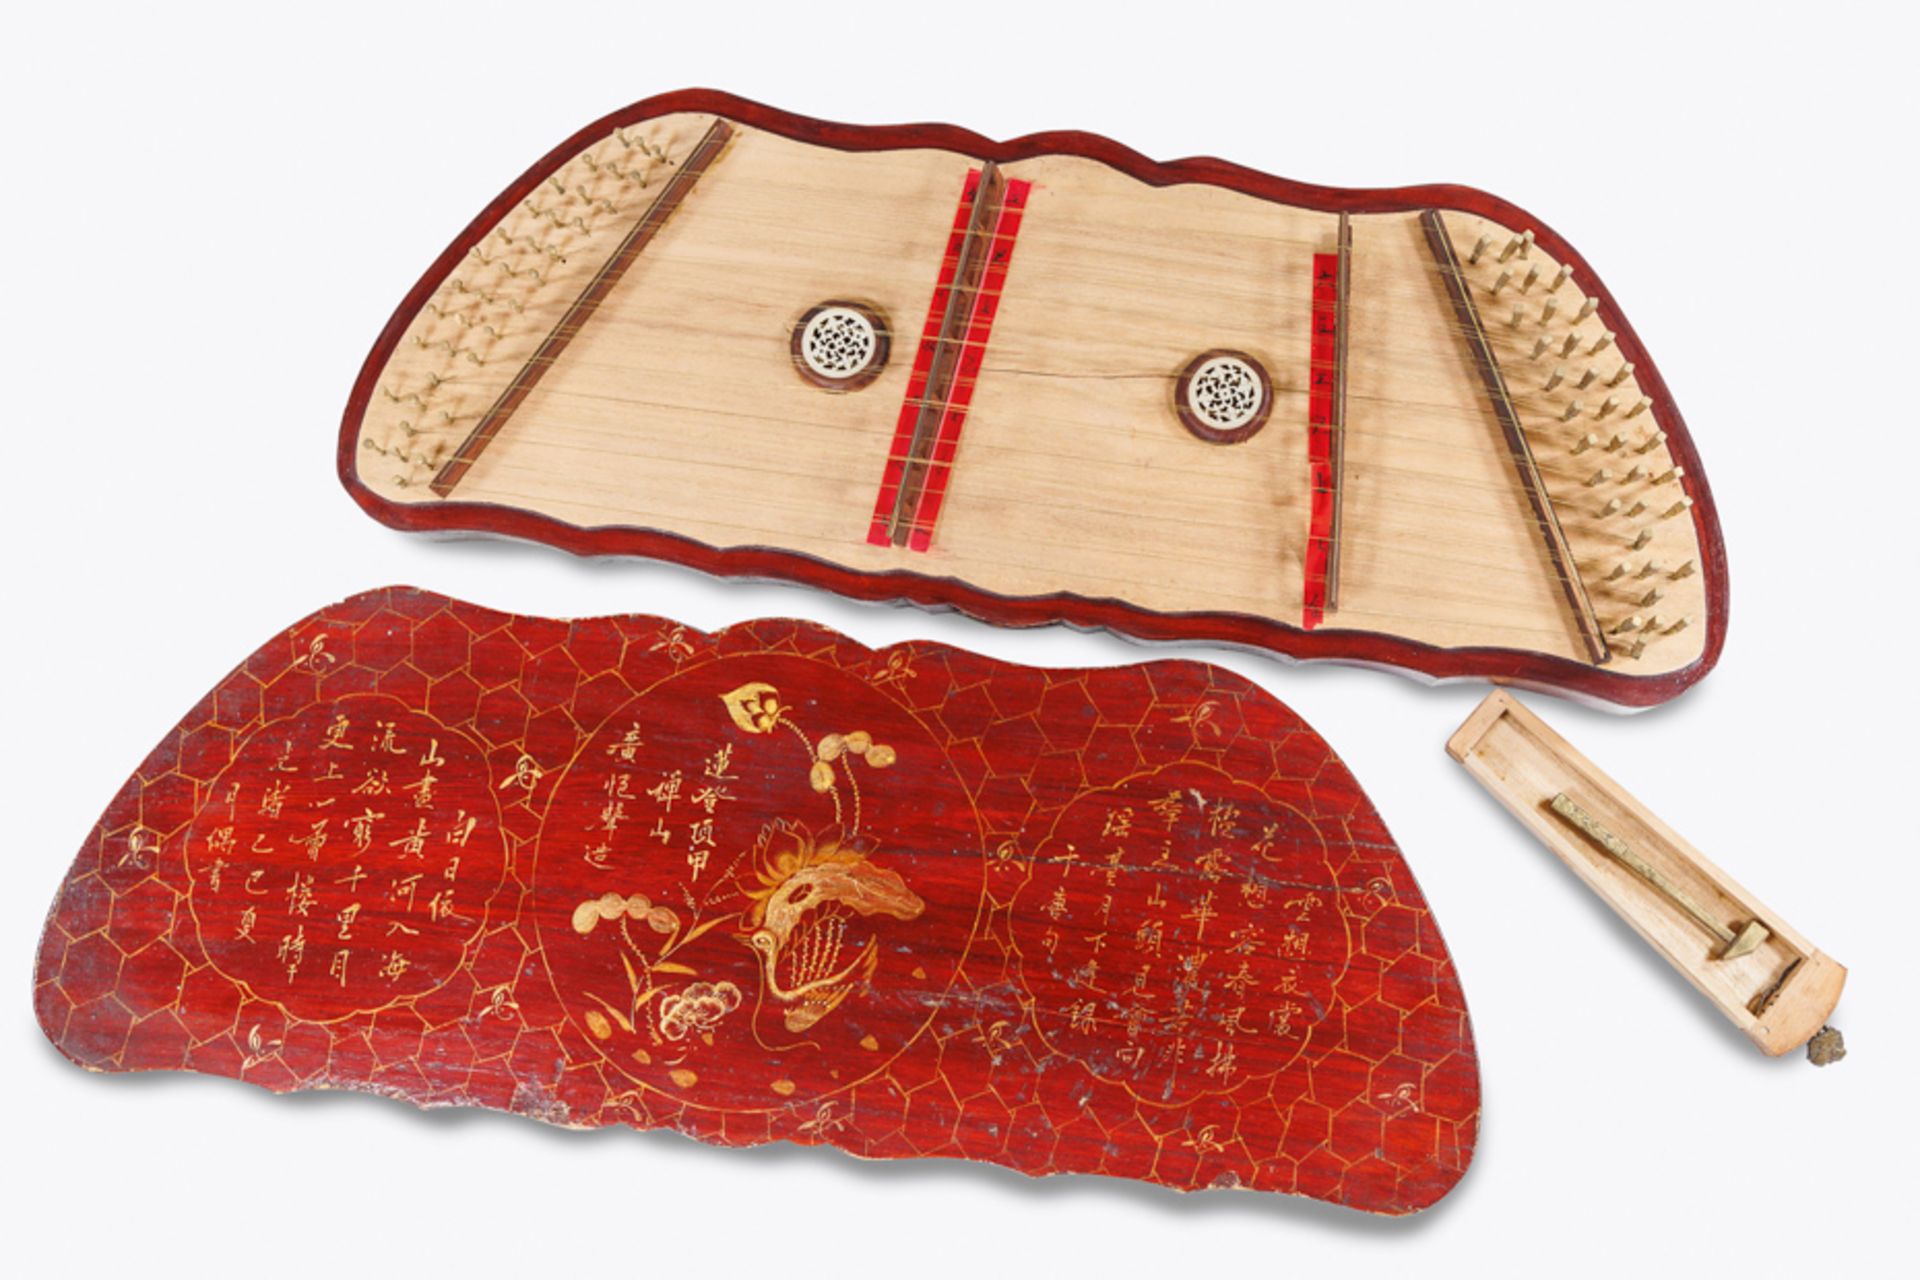 YANG-TJIN ZITHER, CHINA, PROBABLY EARLY TO MID 20TH CENTURY.